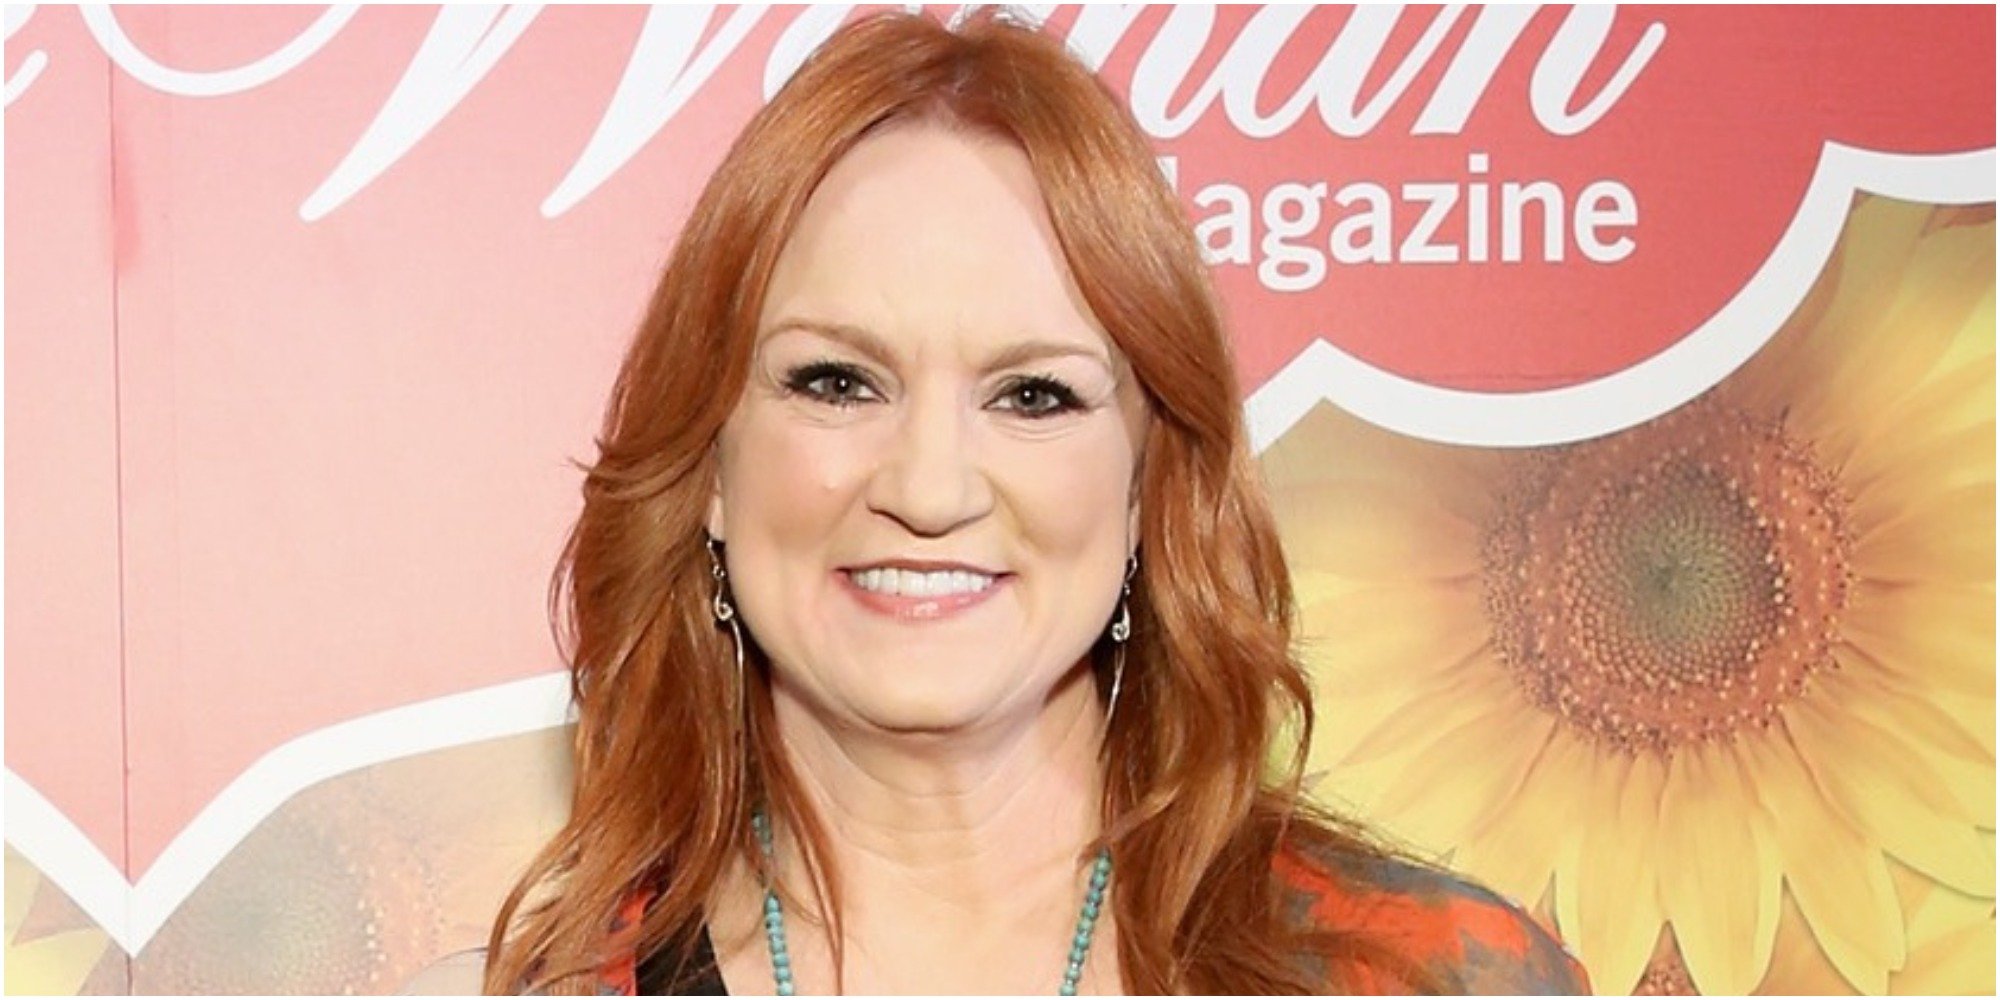 Ree Drummond poses at a book signing.